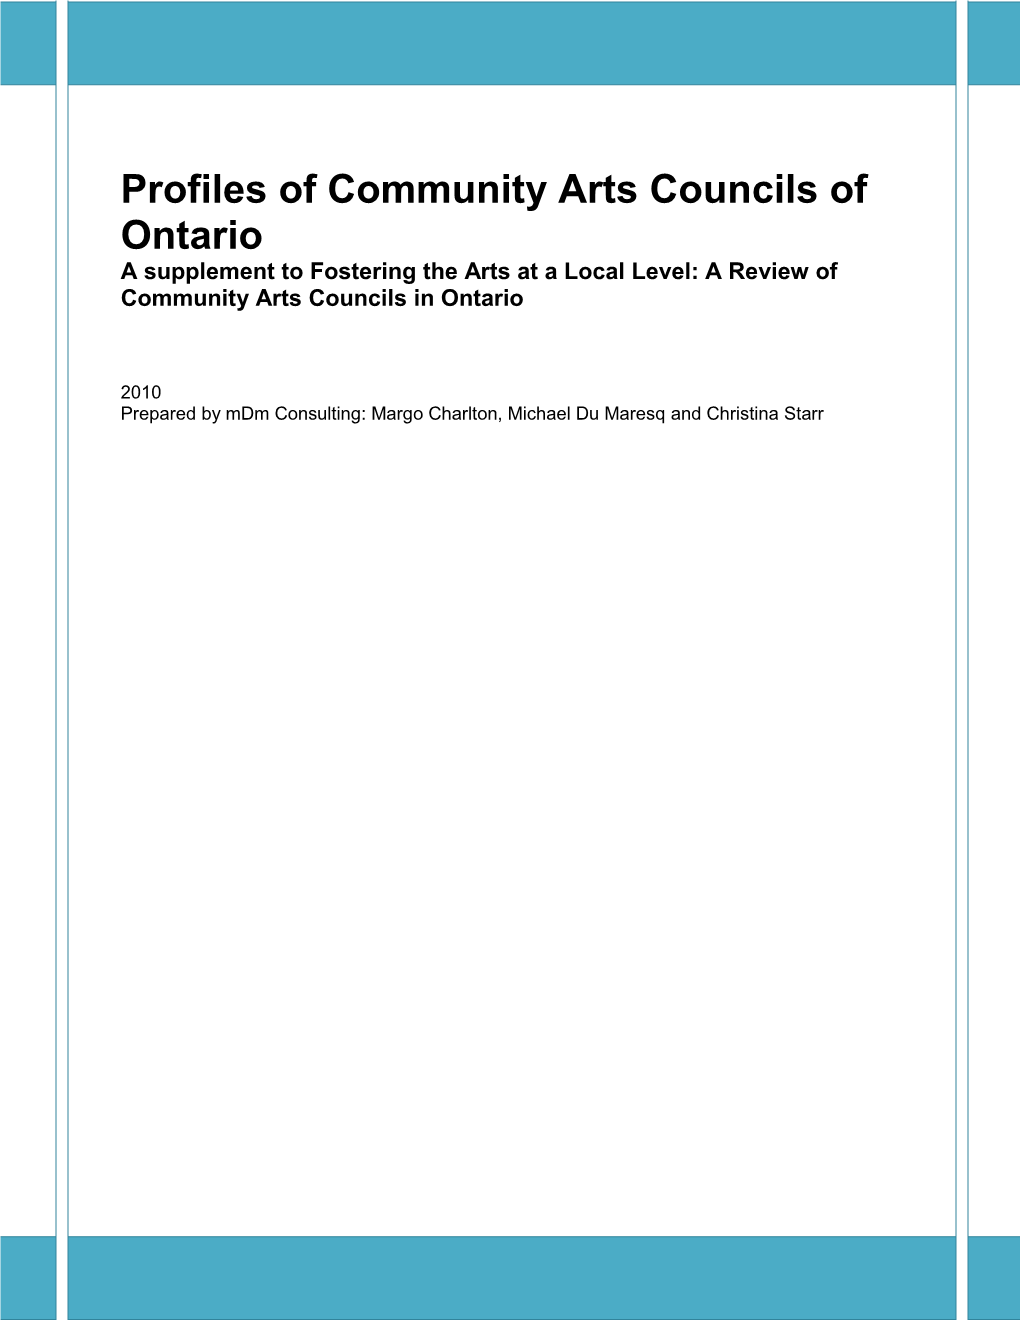 Profiles of Community Arts Councils of Ontario a Supplement to Fostering the Arts at a Local Level: a Review of Community Arts Councils in Ontario